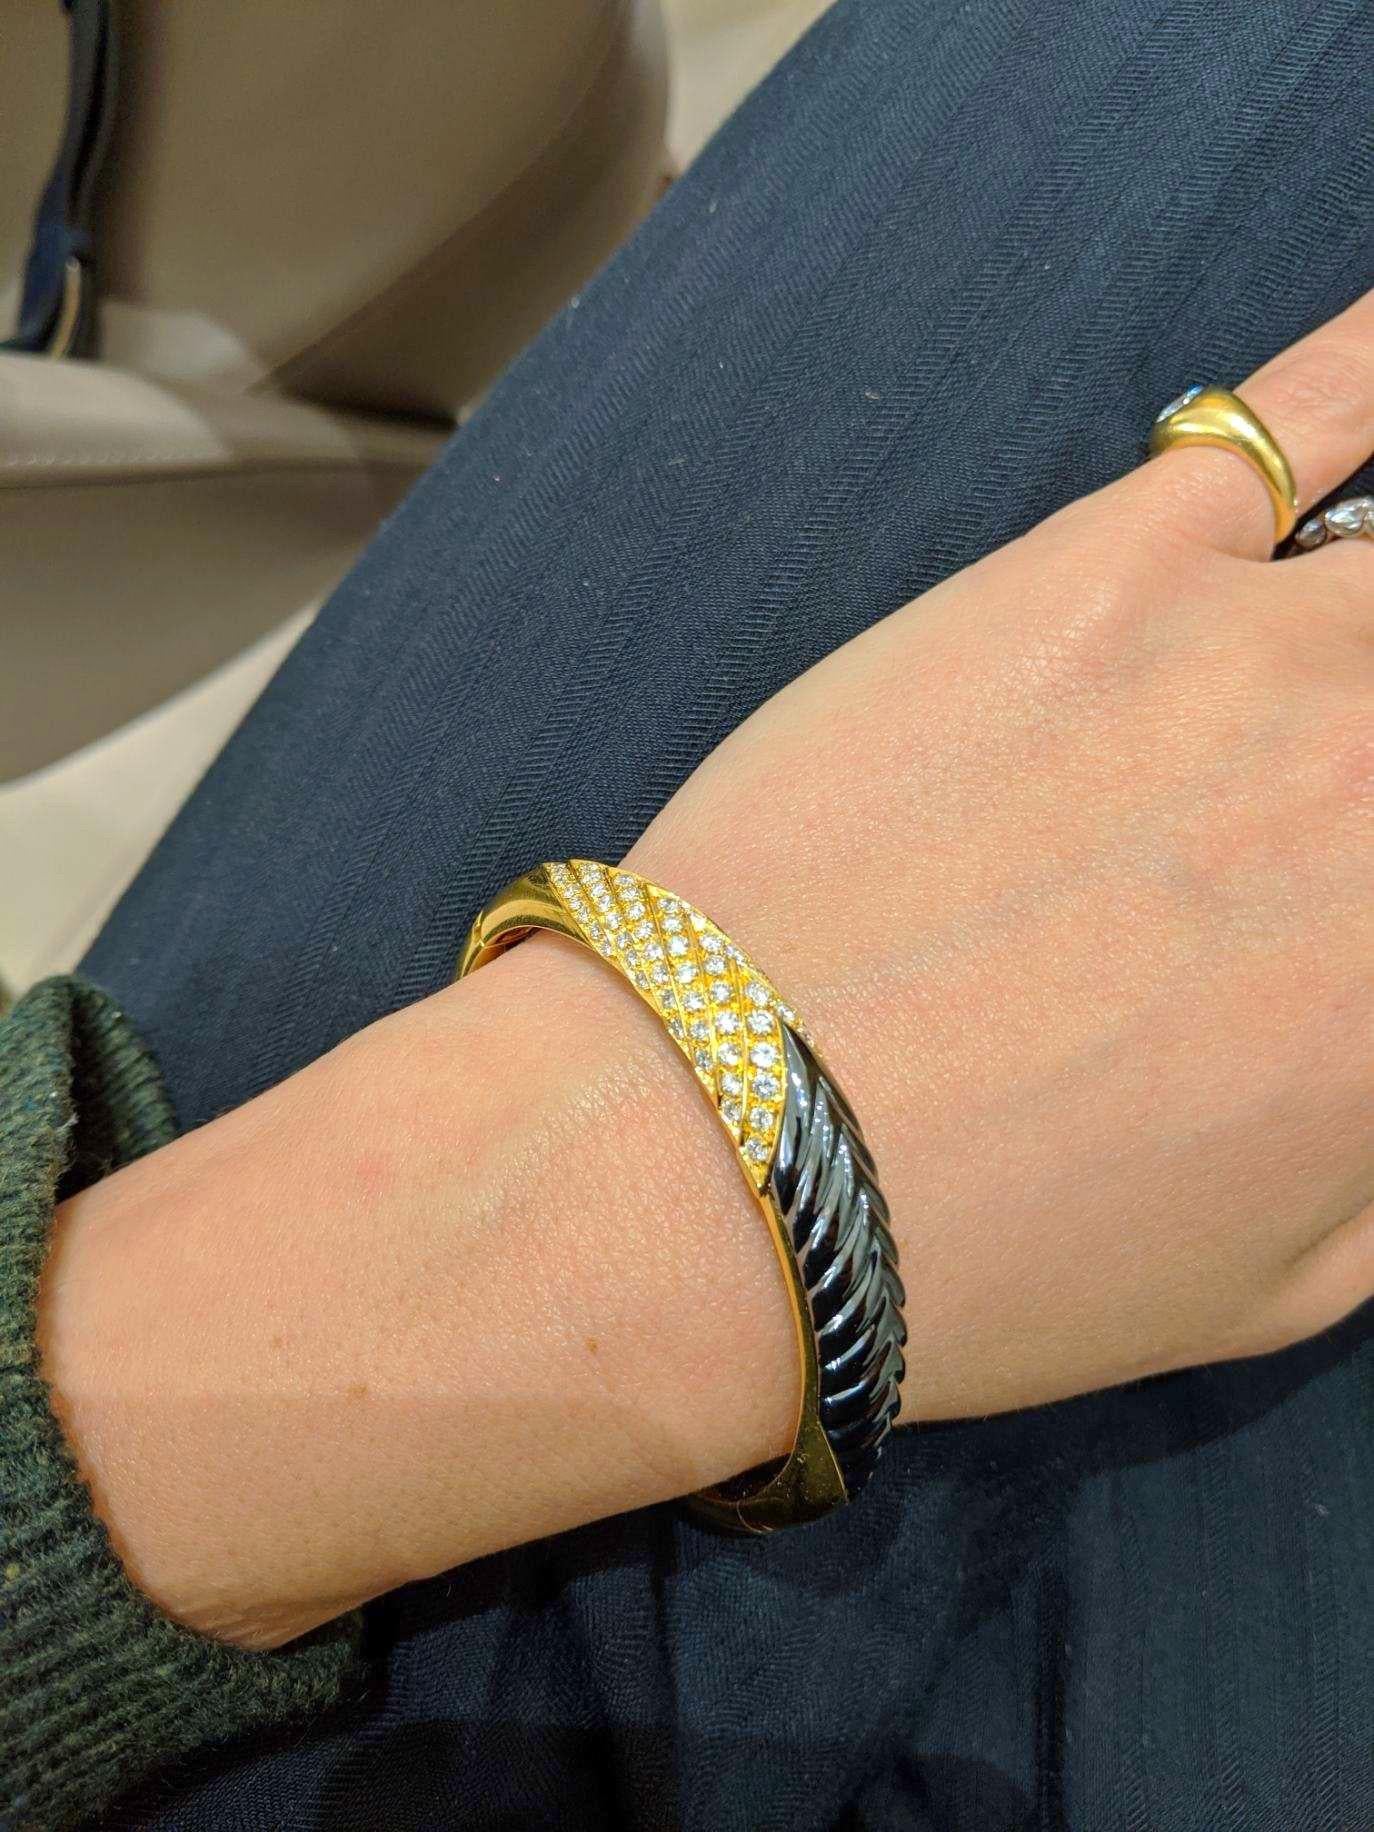 A beautiful 18 karat yellow gold bangle bracelet . Half of  the bracelet is set with round brilliant Diamonds, the other half with hand carved Hematite. The Hematite is fluted and the Diamond setting follows the same pattern....A beautiful contrast